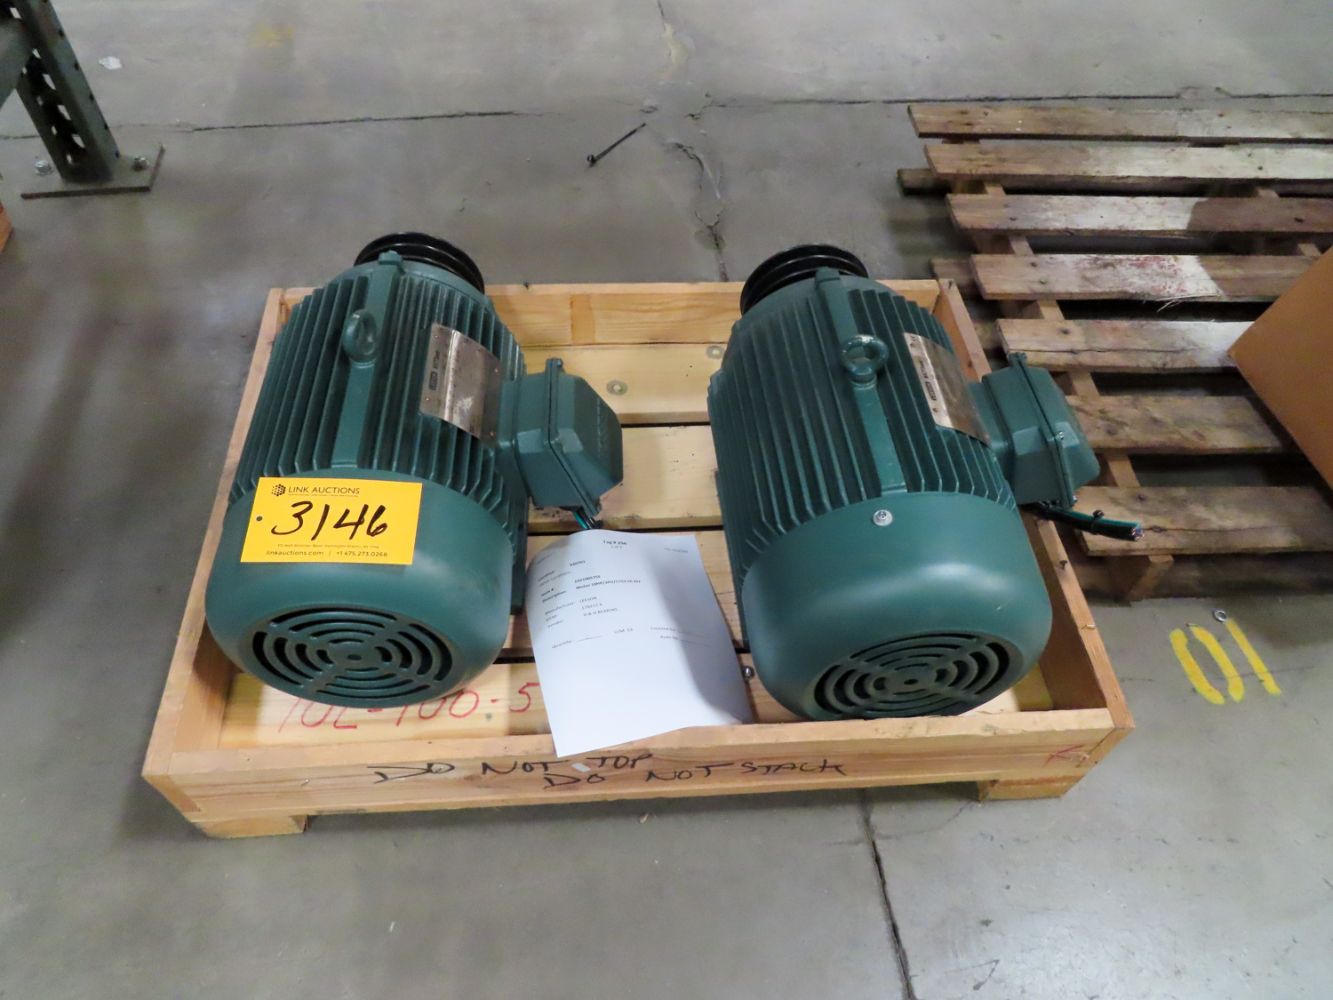 Large Quantity of Brand New Inventory of Electric Motors & Electric Pumps